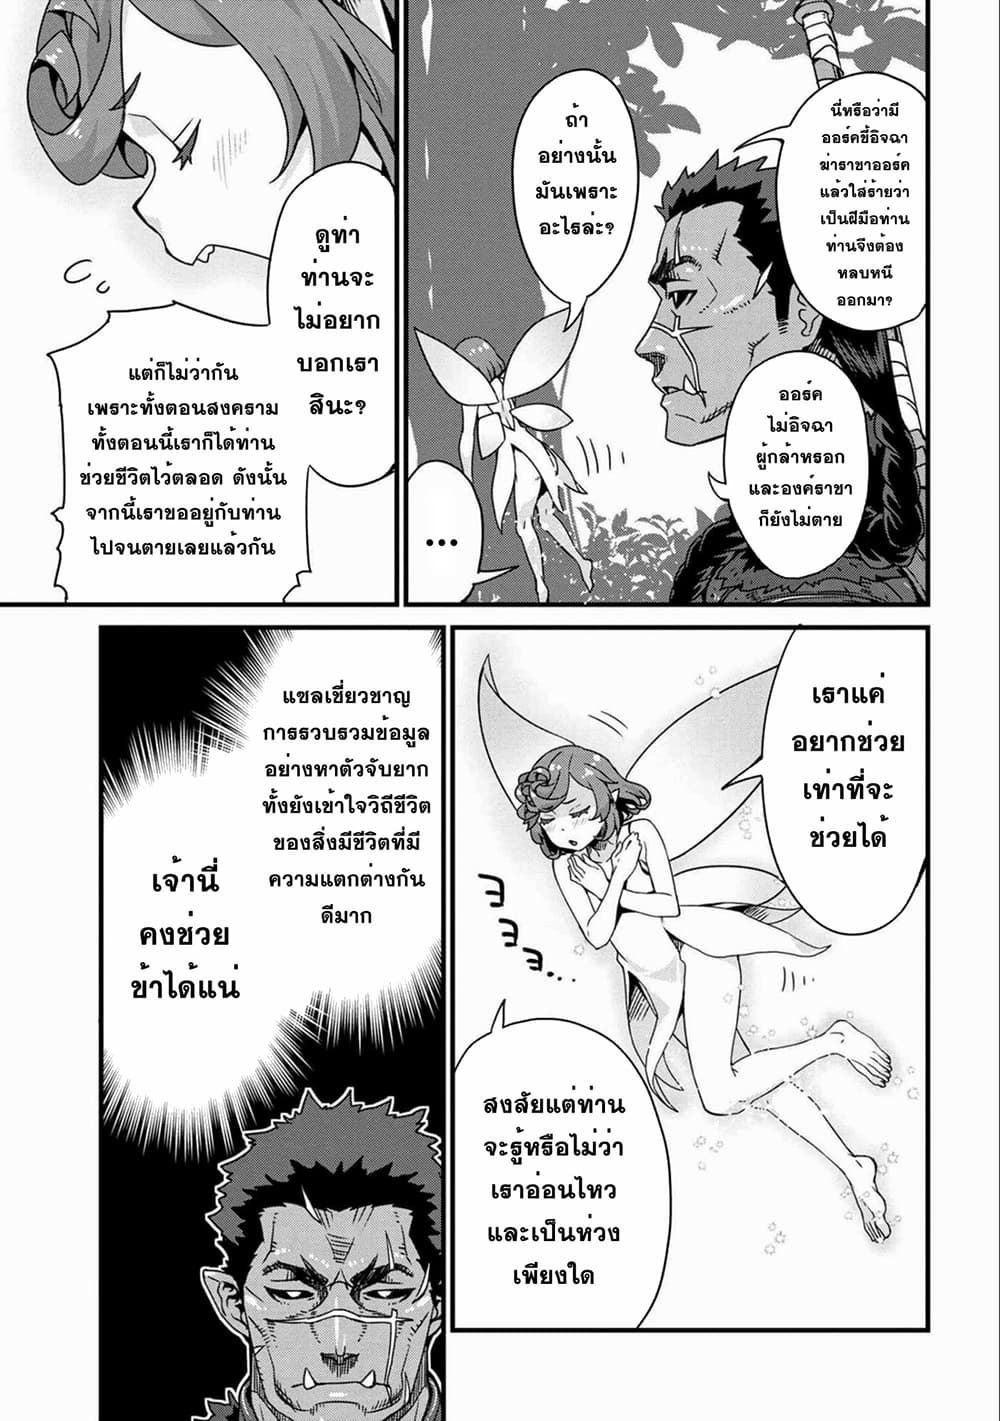 Orc Hero Story – Discovery Chronicles ตอนที่ 1.1 (13)